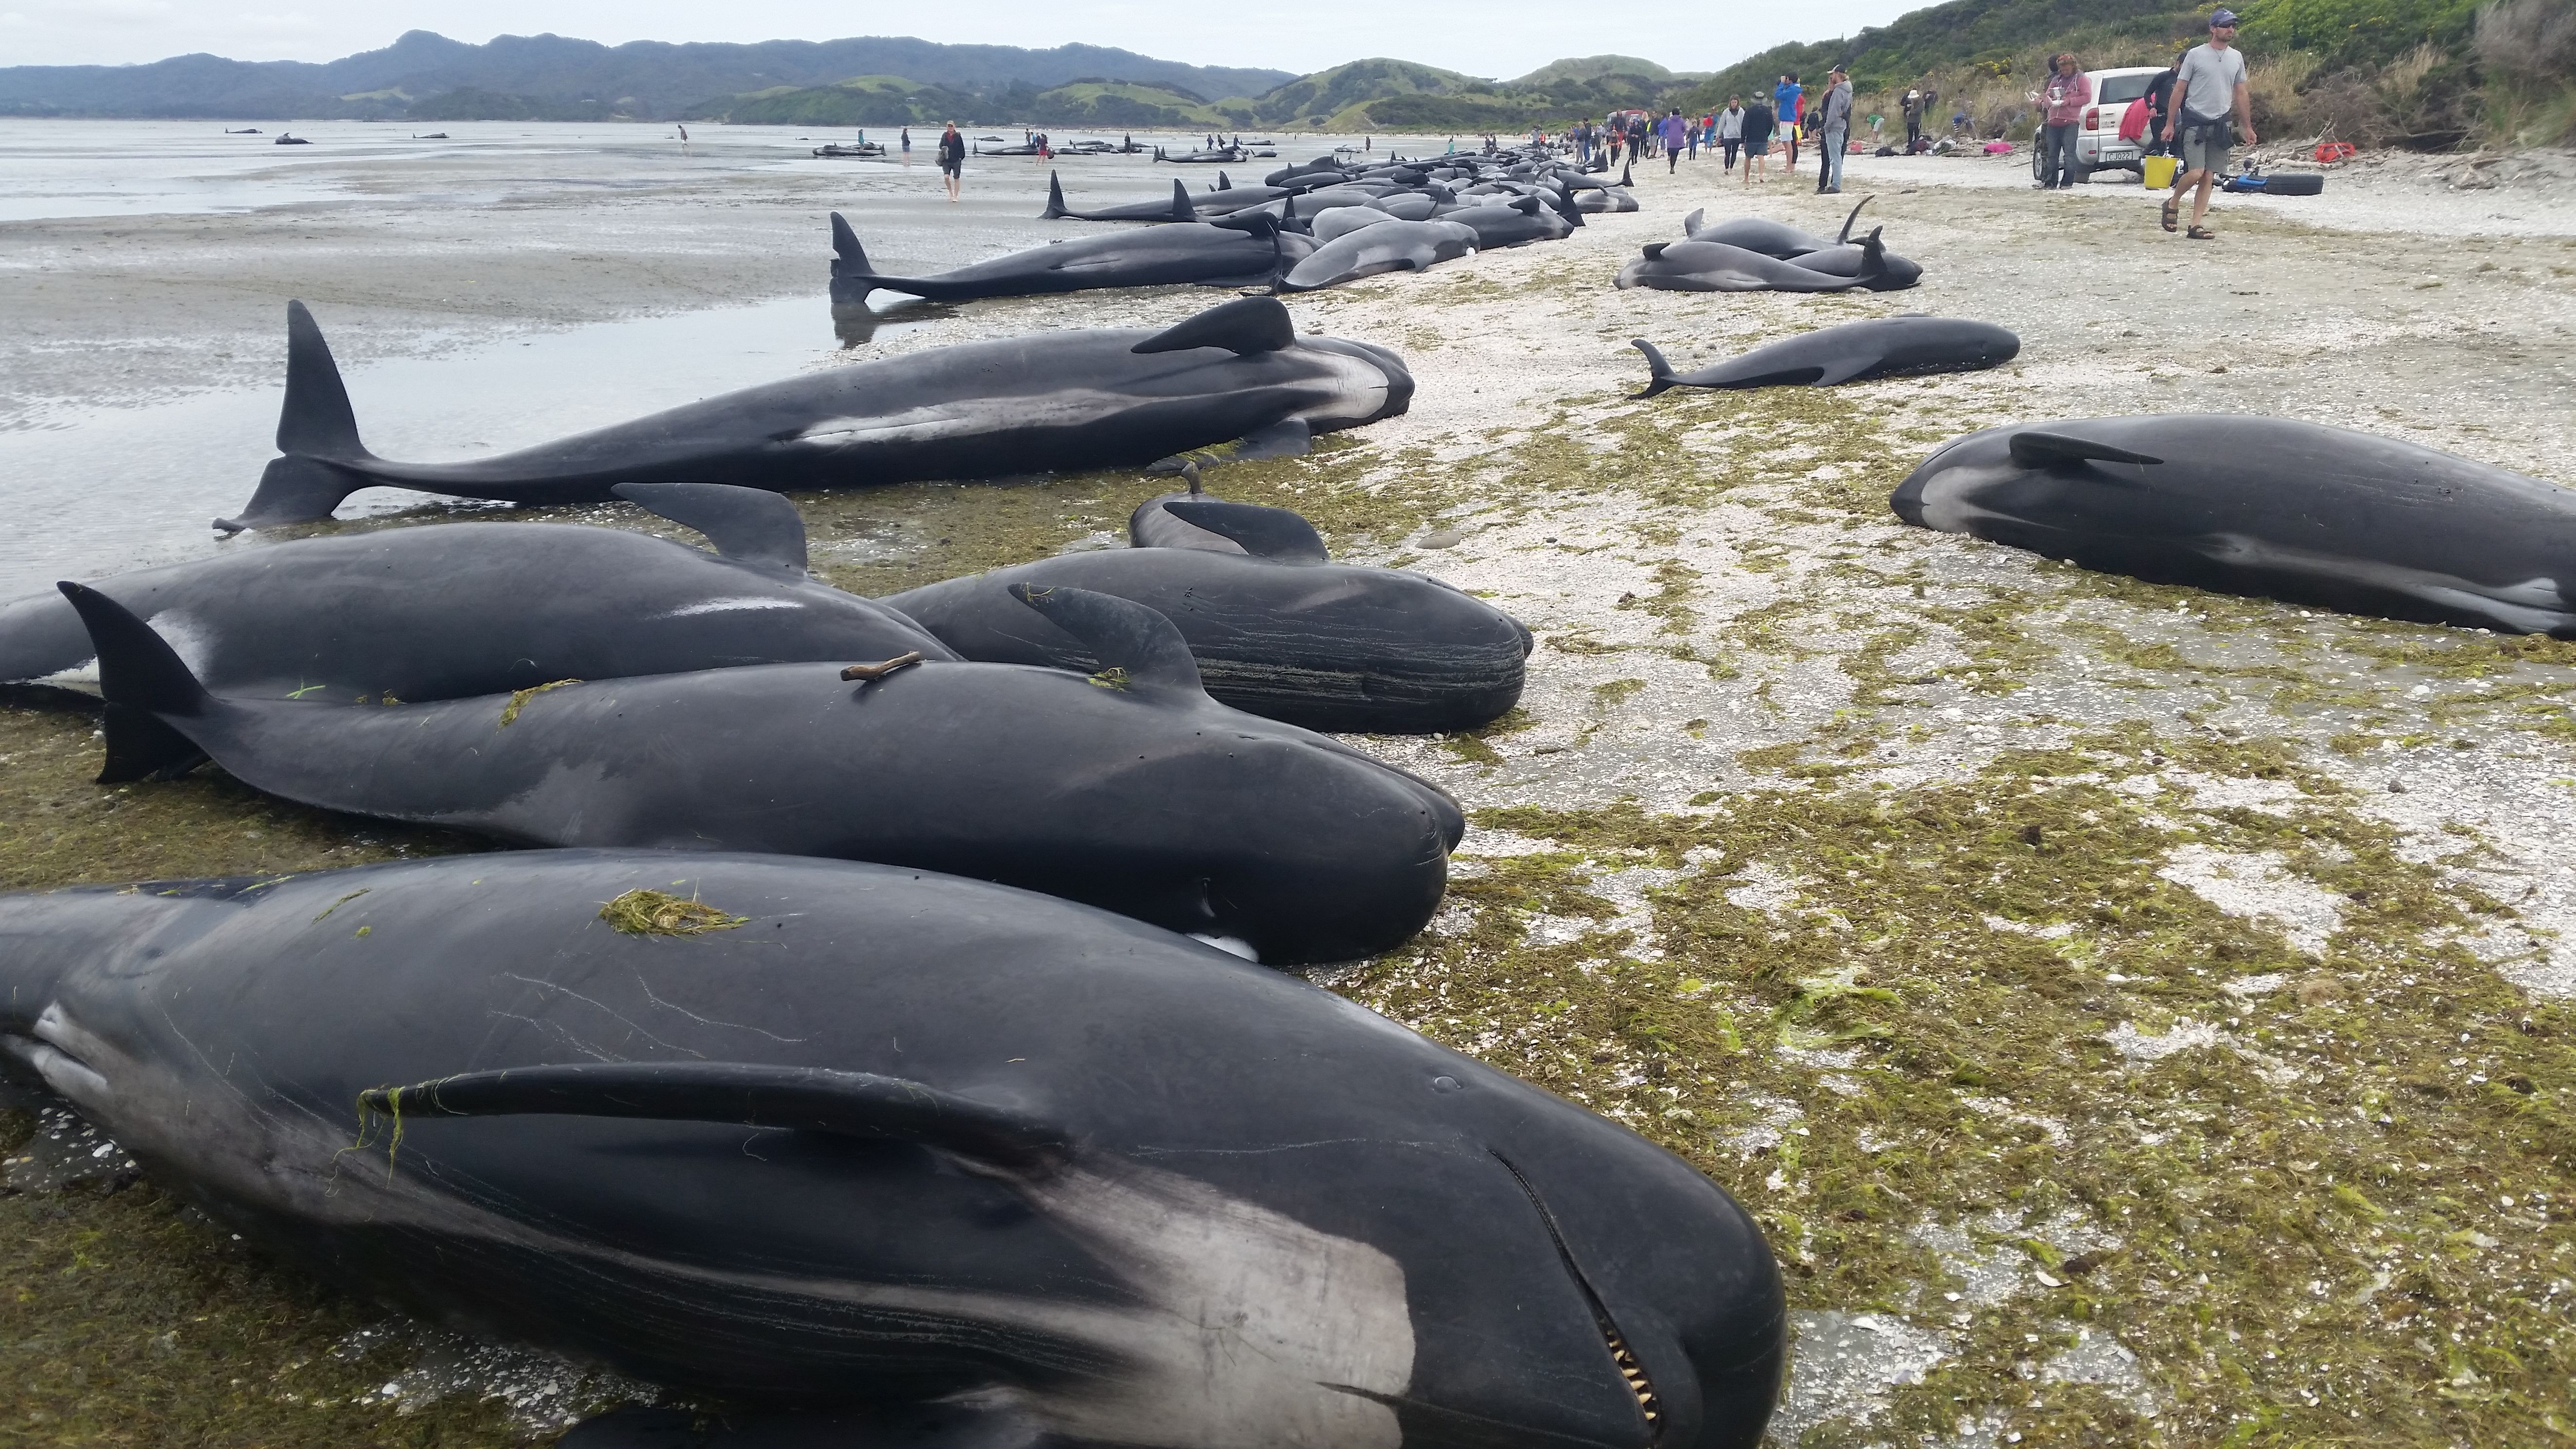 More than 400 pilot whales stranded themselves on a New Zealand beach on the evening of Thursday February 9.